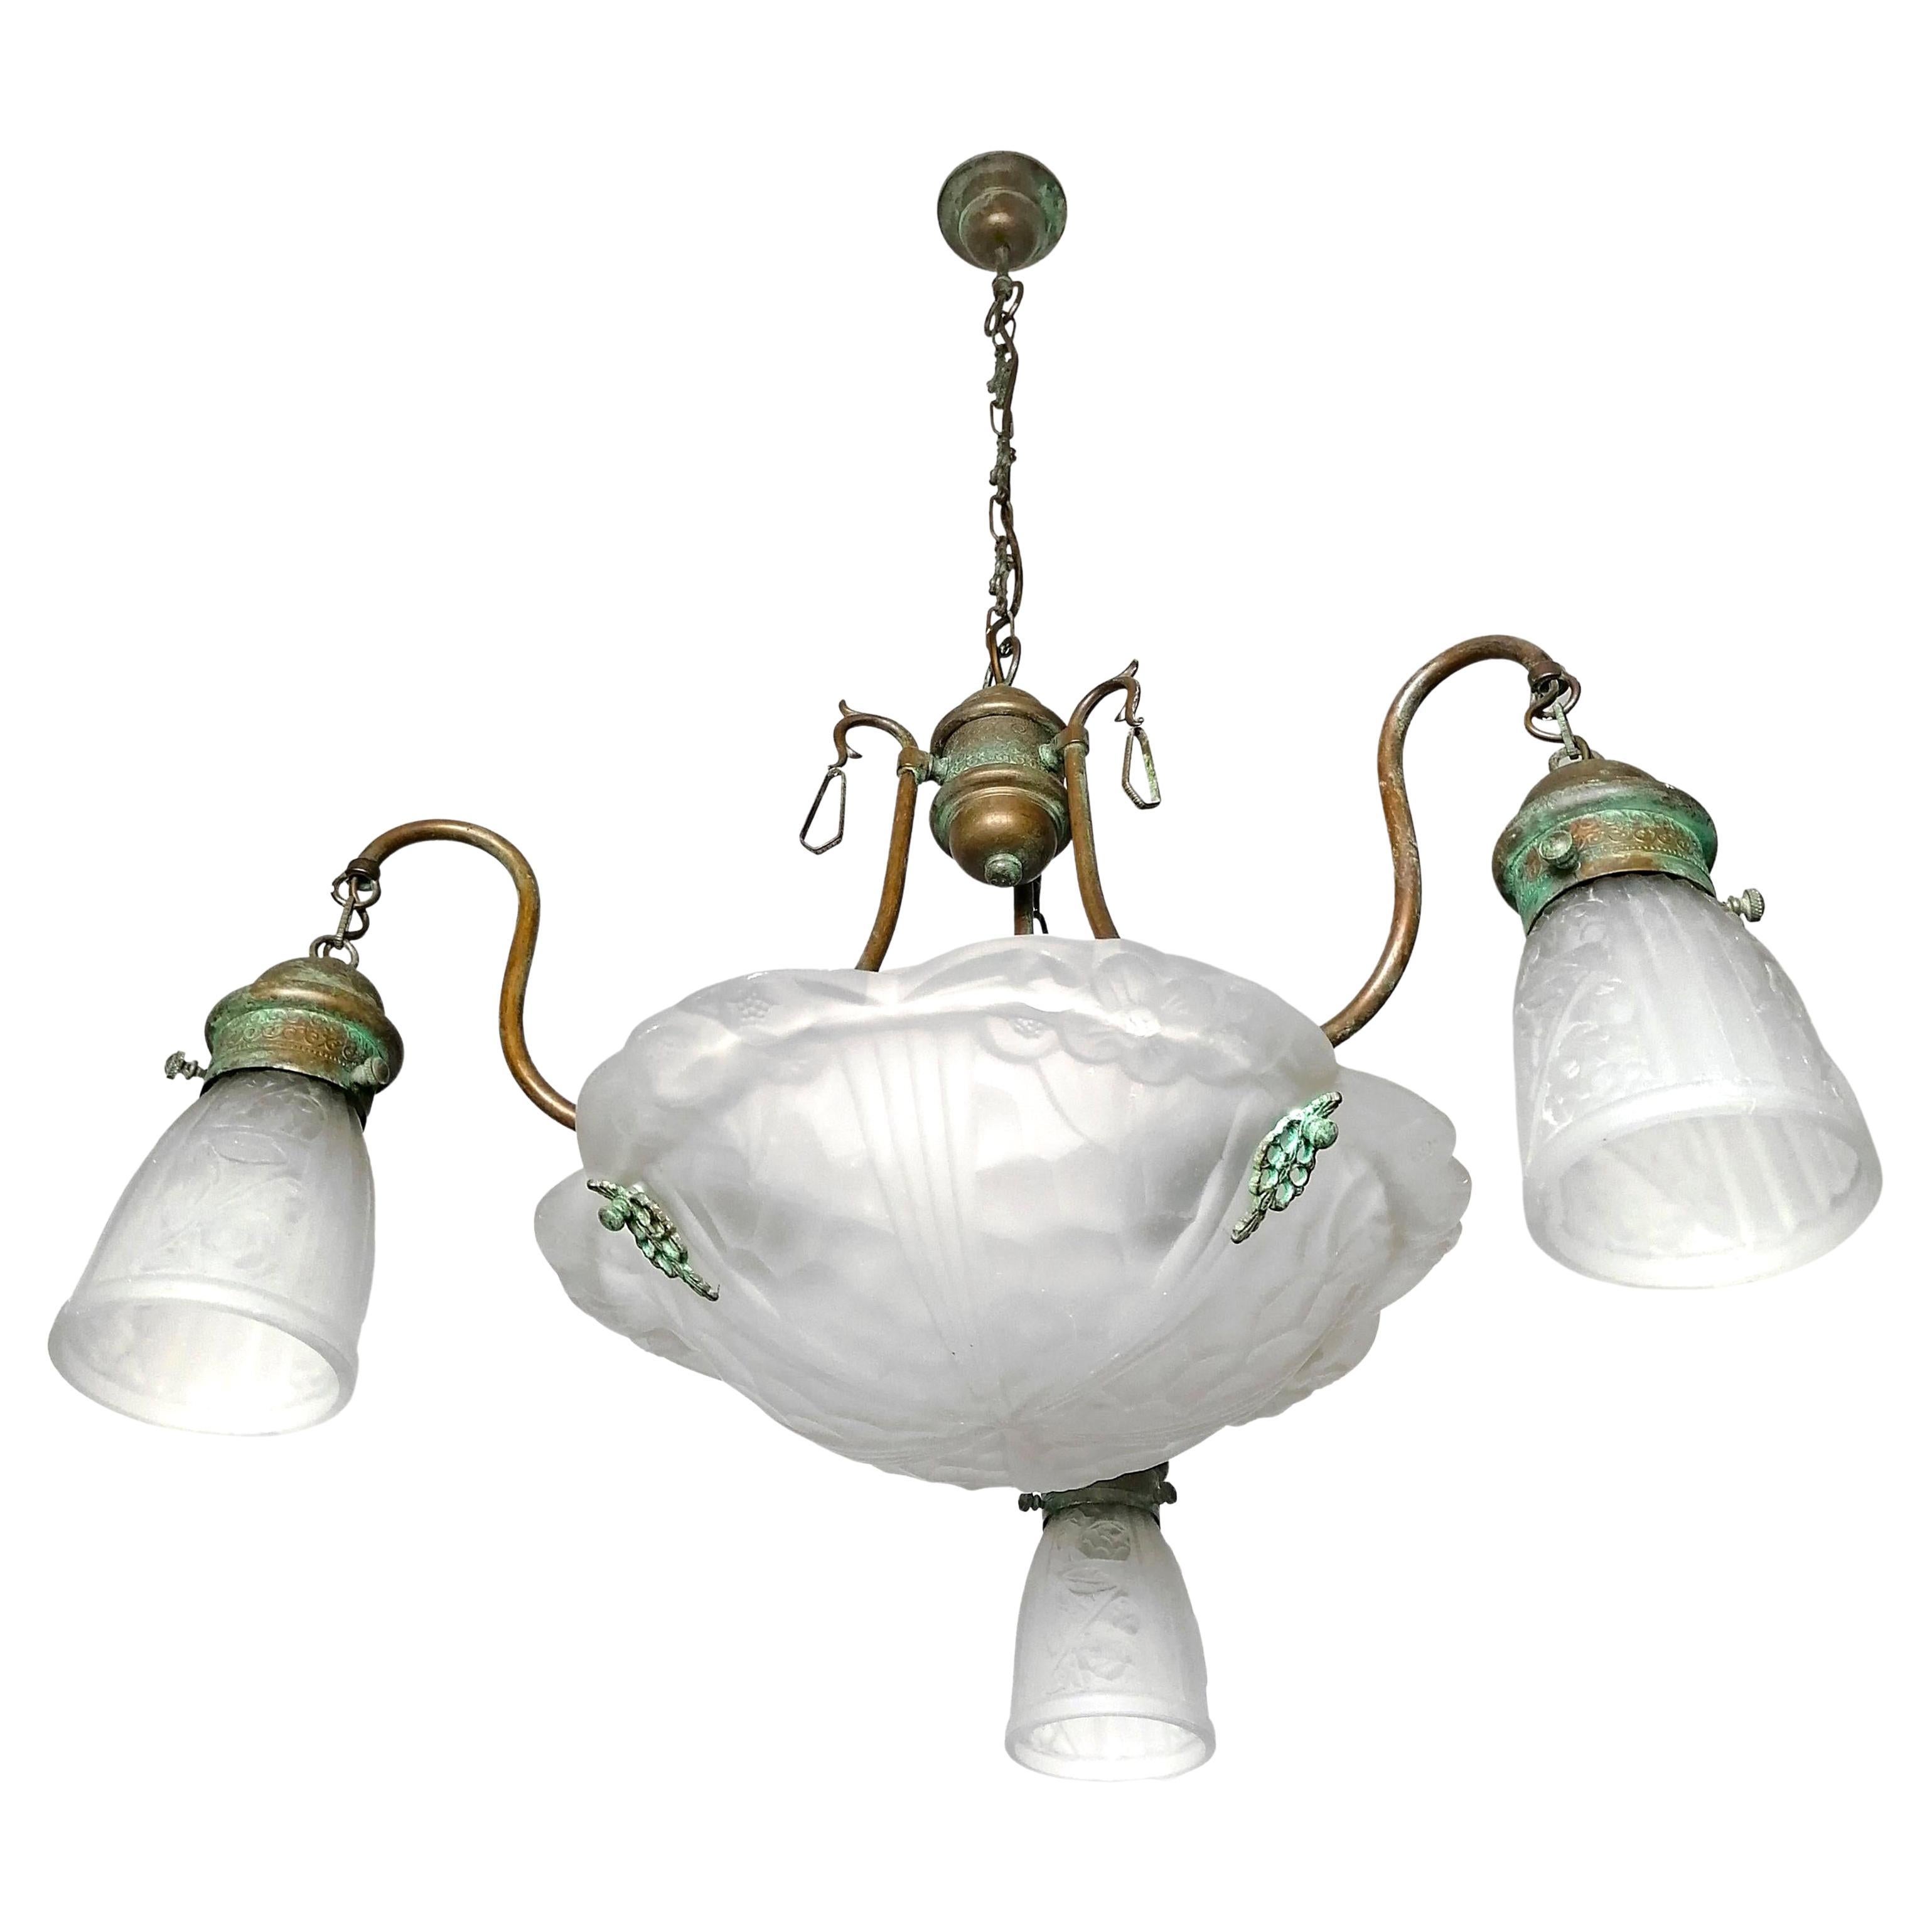 Beautiful French Art Deco chandelier or pendant. It features a brass structure base and floral shaped glass shades. Age patina
Dimensions
Height: 43.31 in. (chain =13.77 in.) / 110 cm (chain = 35 cm)
Diameter: 27.56 in. (70 cm)
Six light bulbs E